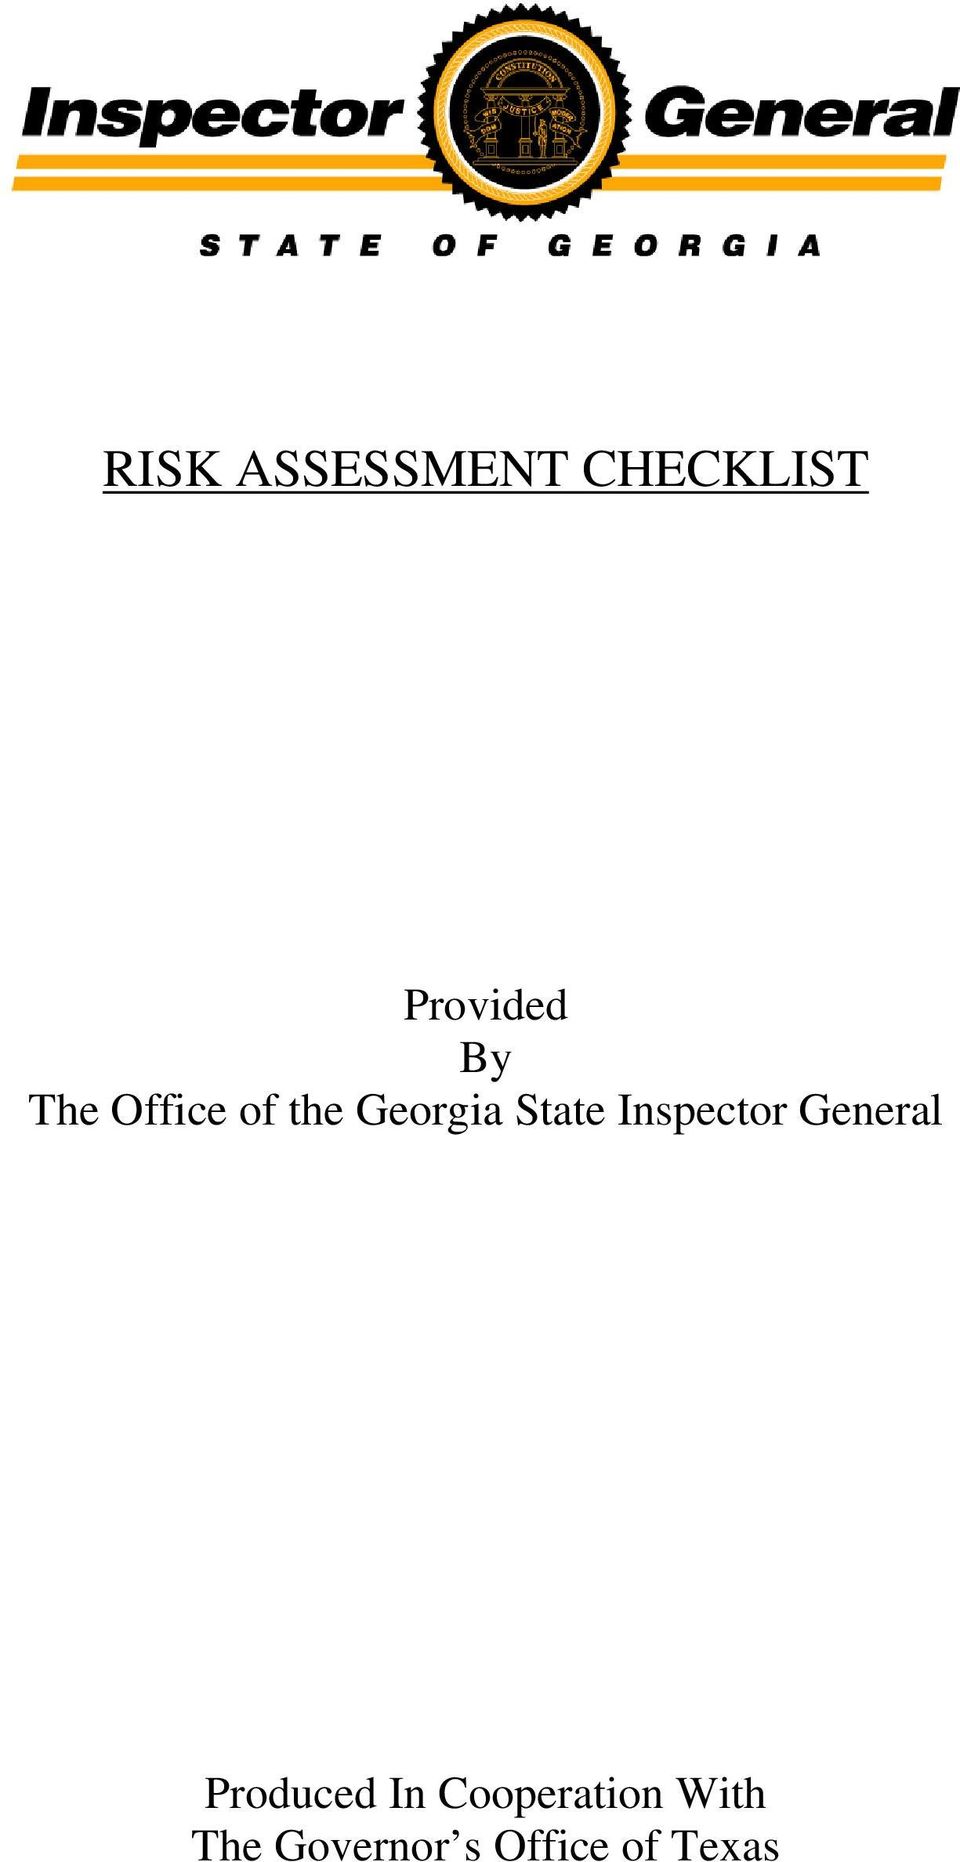 Inspector General Produced In